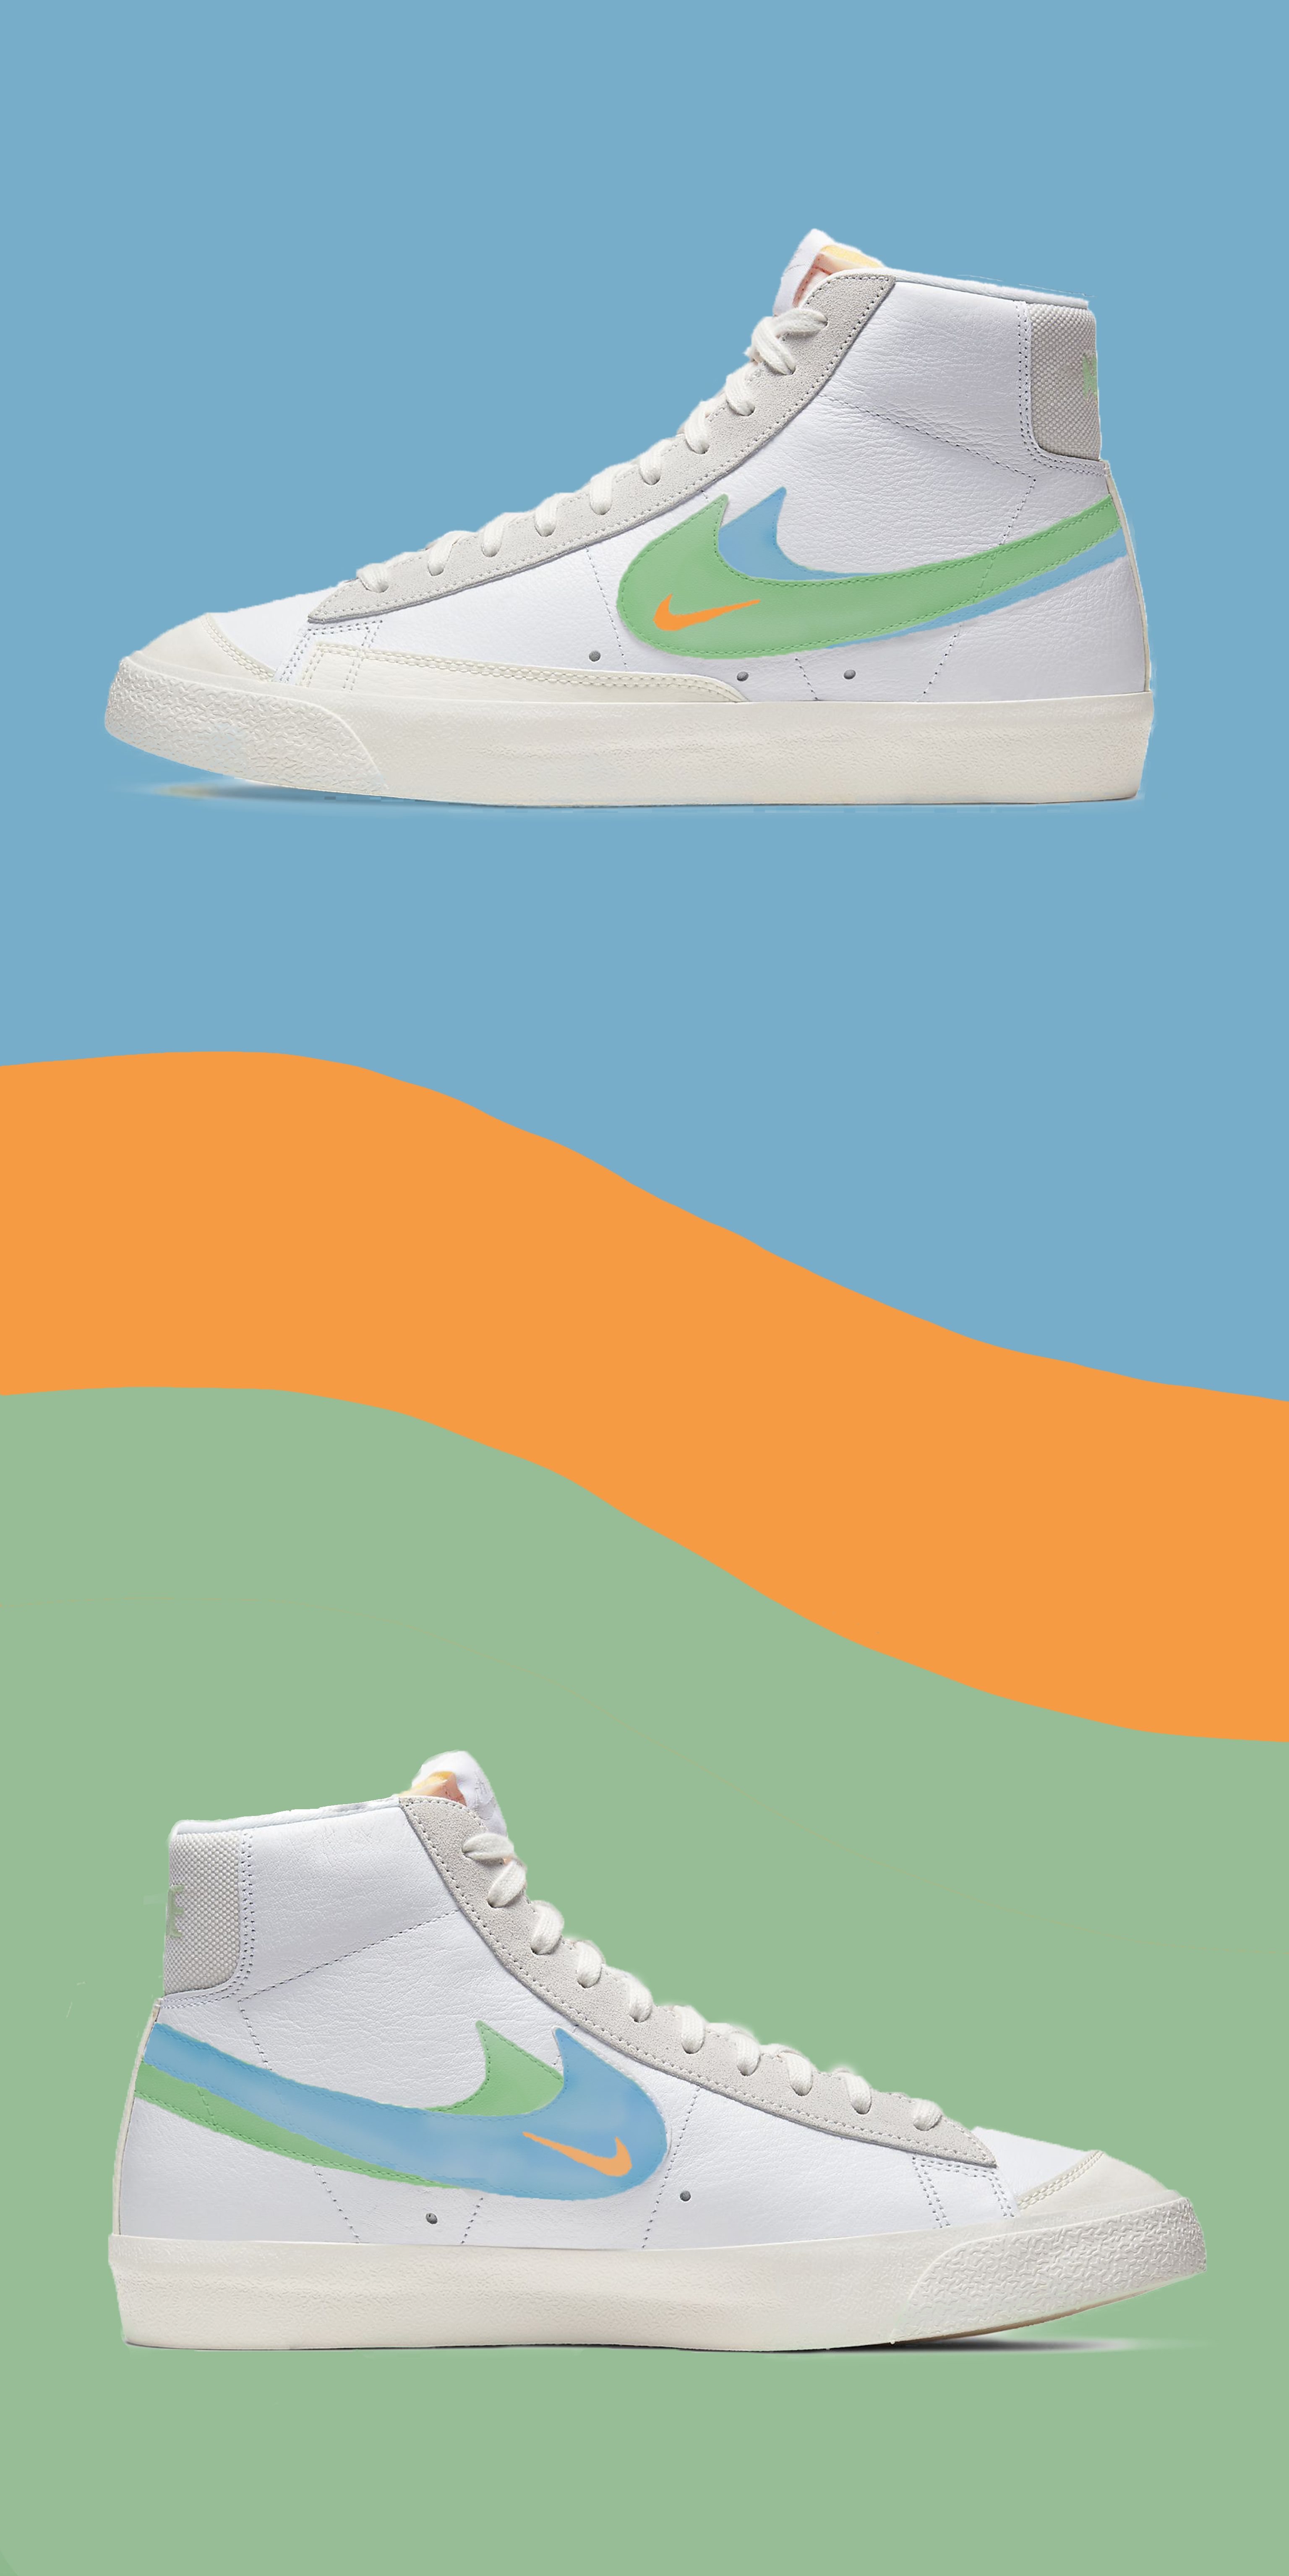 Free download THE END Chaussures de sport mode Photographie rtro Chaussures art [679x1024] for your Desktop, Mobile & Tablet. Explore Nike Blazer Wallpaper. Wallpaper Of Nike, Nike Wallpaper, Pink Nike Wallpaper